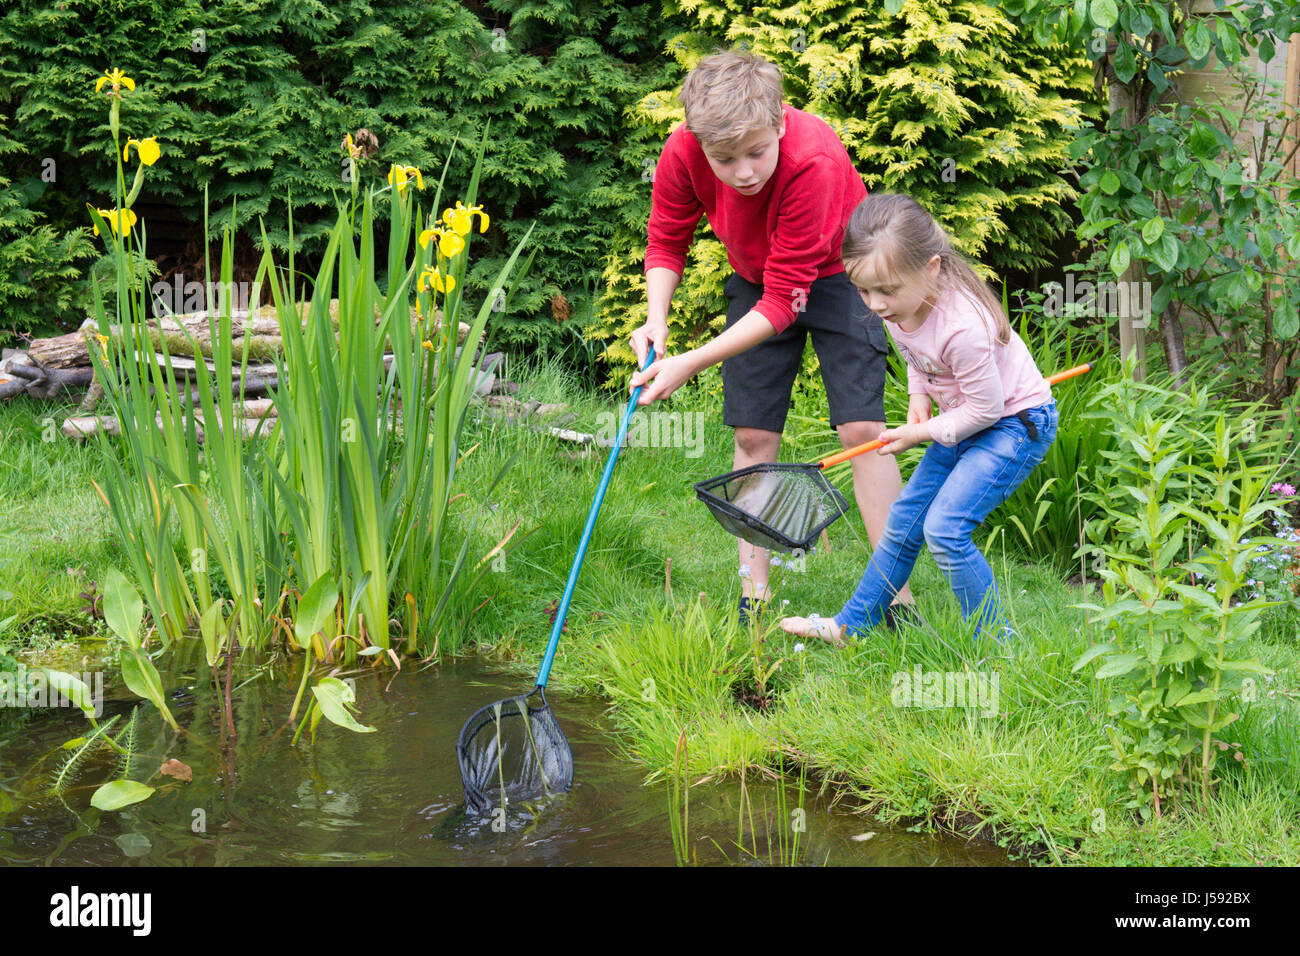 eleven year old boy and four years old girl pond dipping trying to catch tadpoles and other wildlife in a net in a garden pond. Sussex, UK. May. Stock Photo